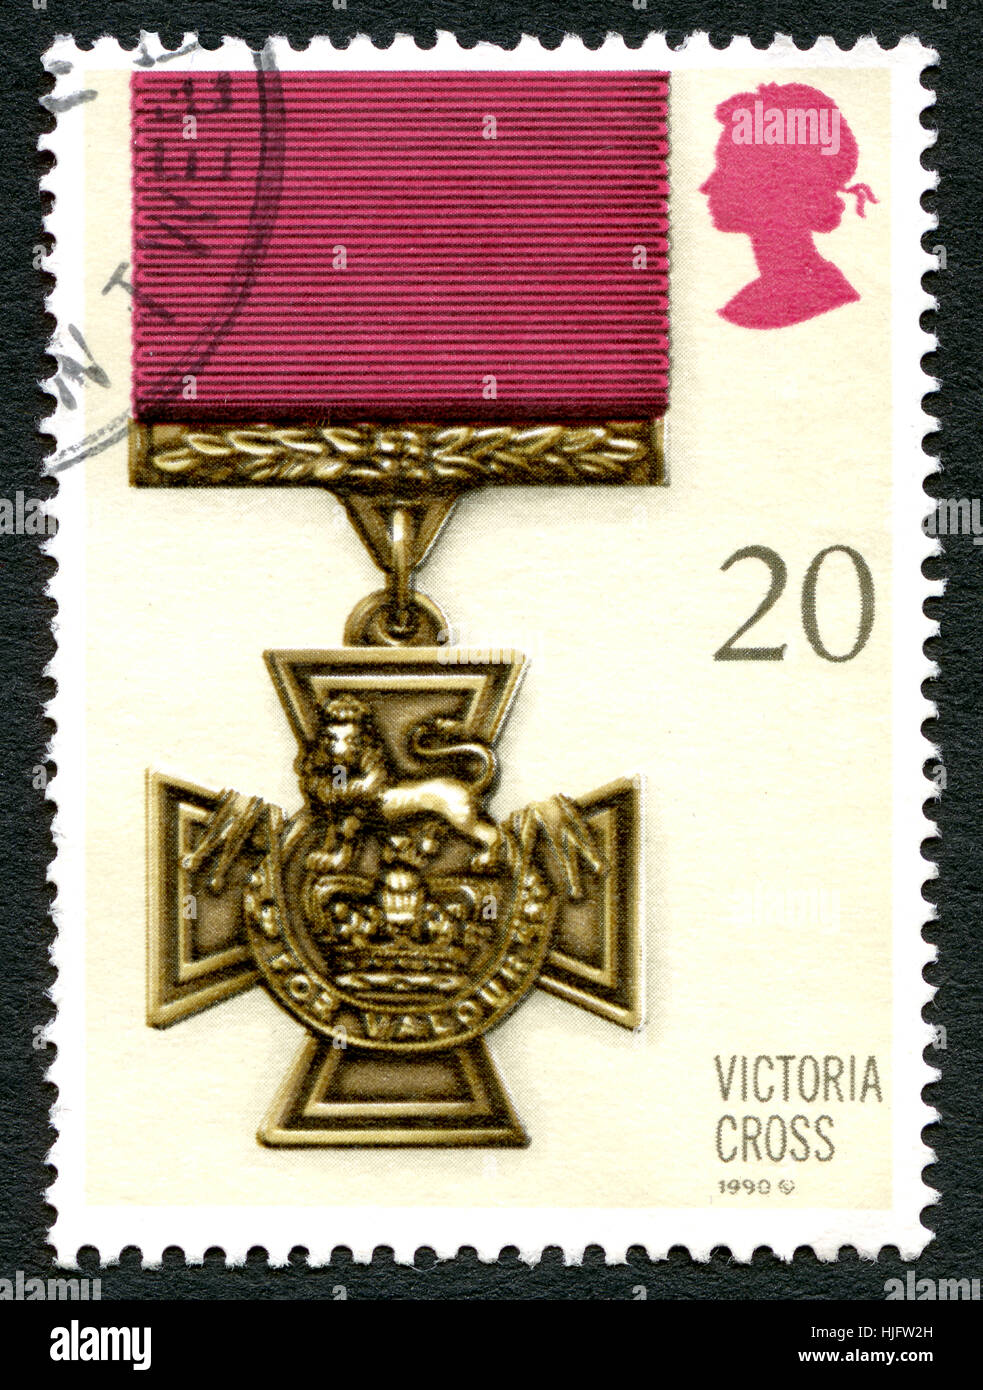 GREAT BRITAIN - CIRCA 1990: A used postage stamp from the UK, depictcing an illustration of a Victoria Cross medal - the highest award for gallantry,  Stock Photo